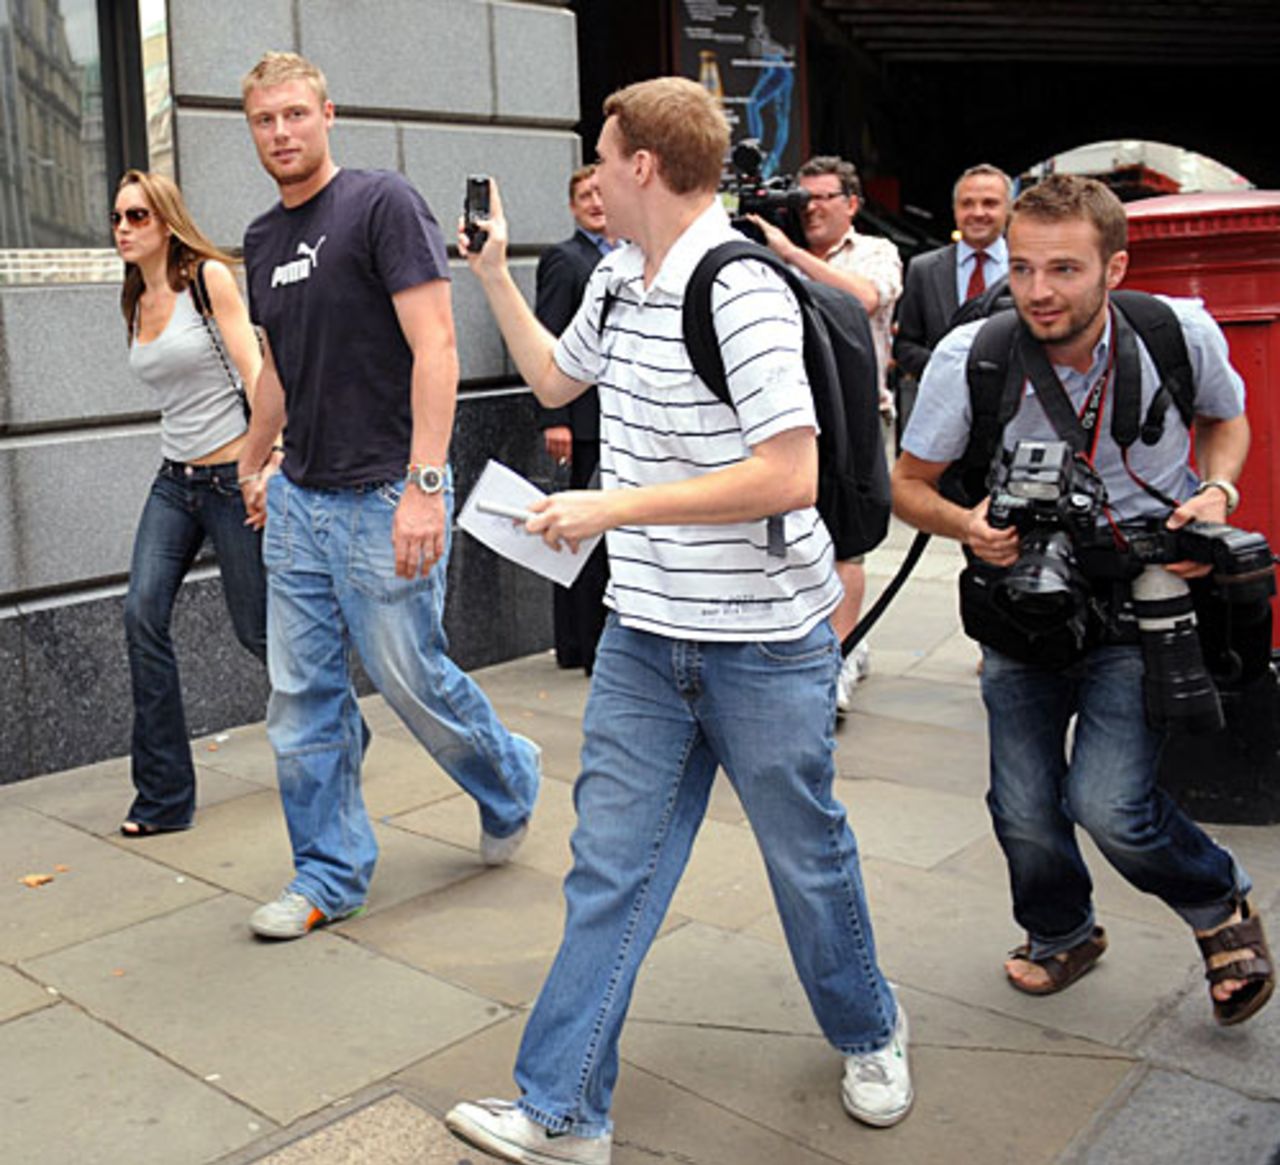 Andrew Flintoff and wife Rachael are followed by press persons and fans, London, August 24, 2009